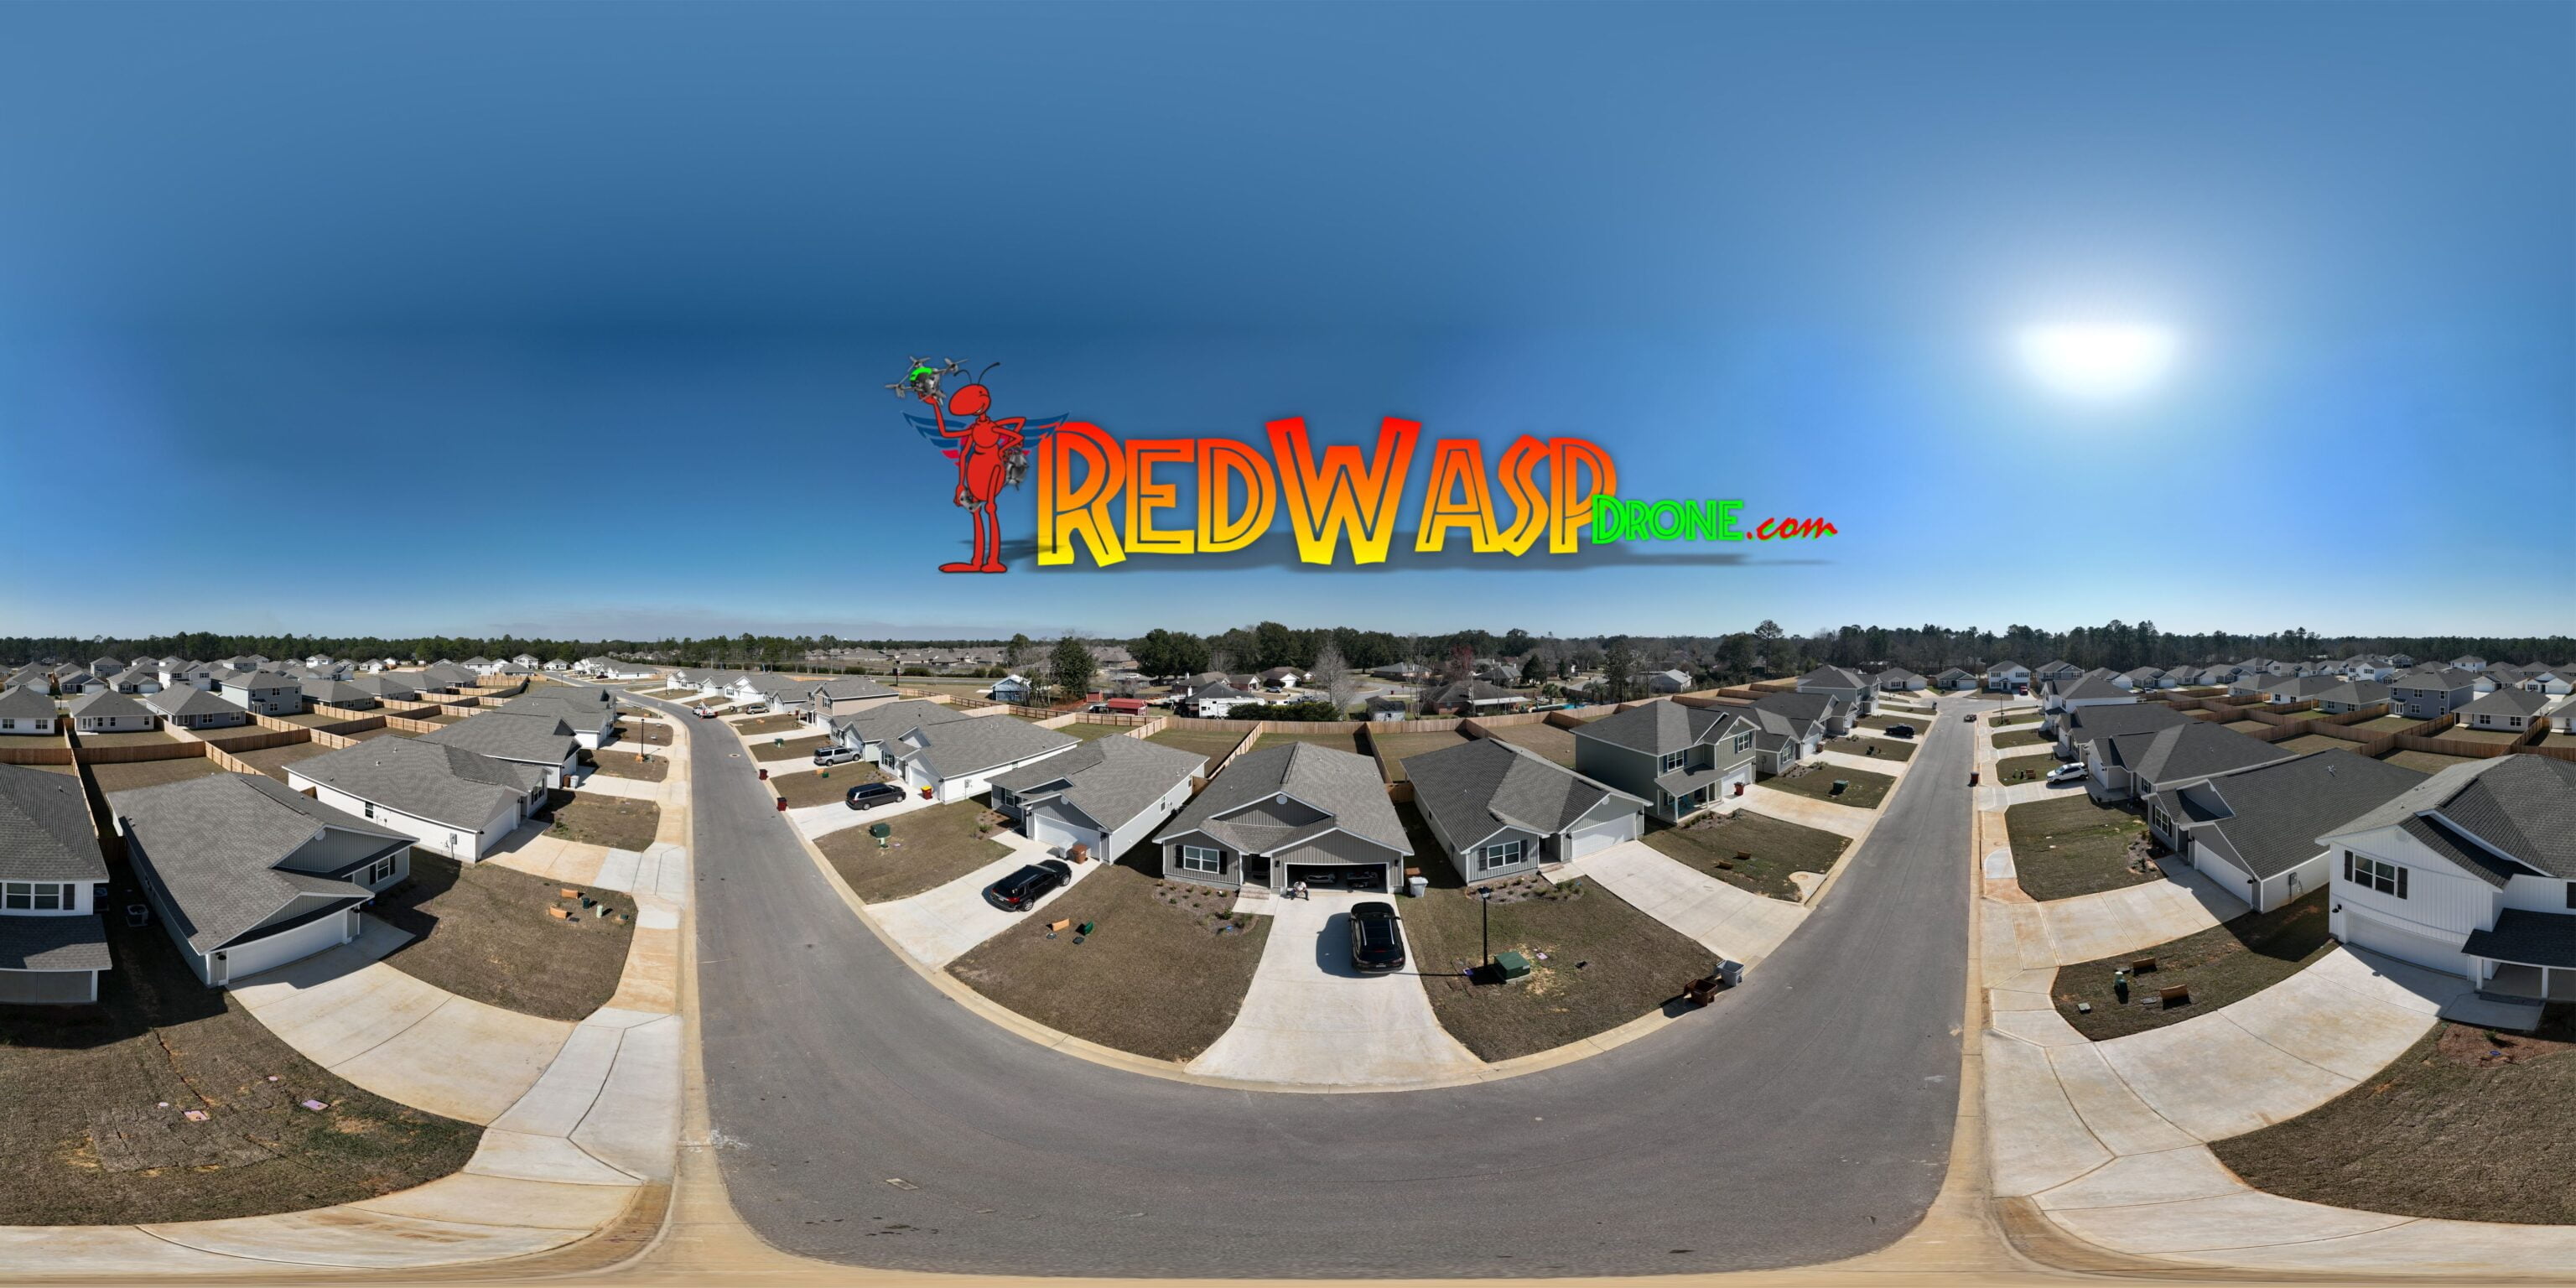 Red Wasp Drone, real estate drone services, aerial real estate photography, drone videography, virtual property tours